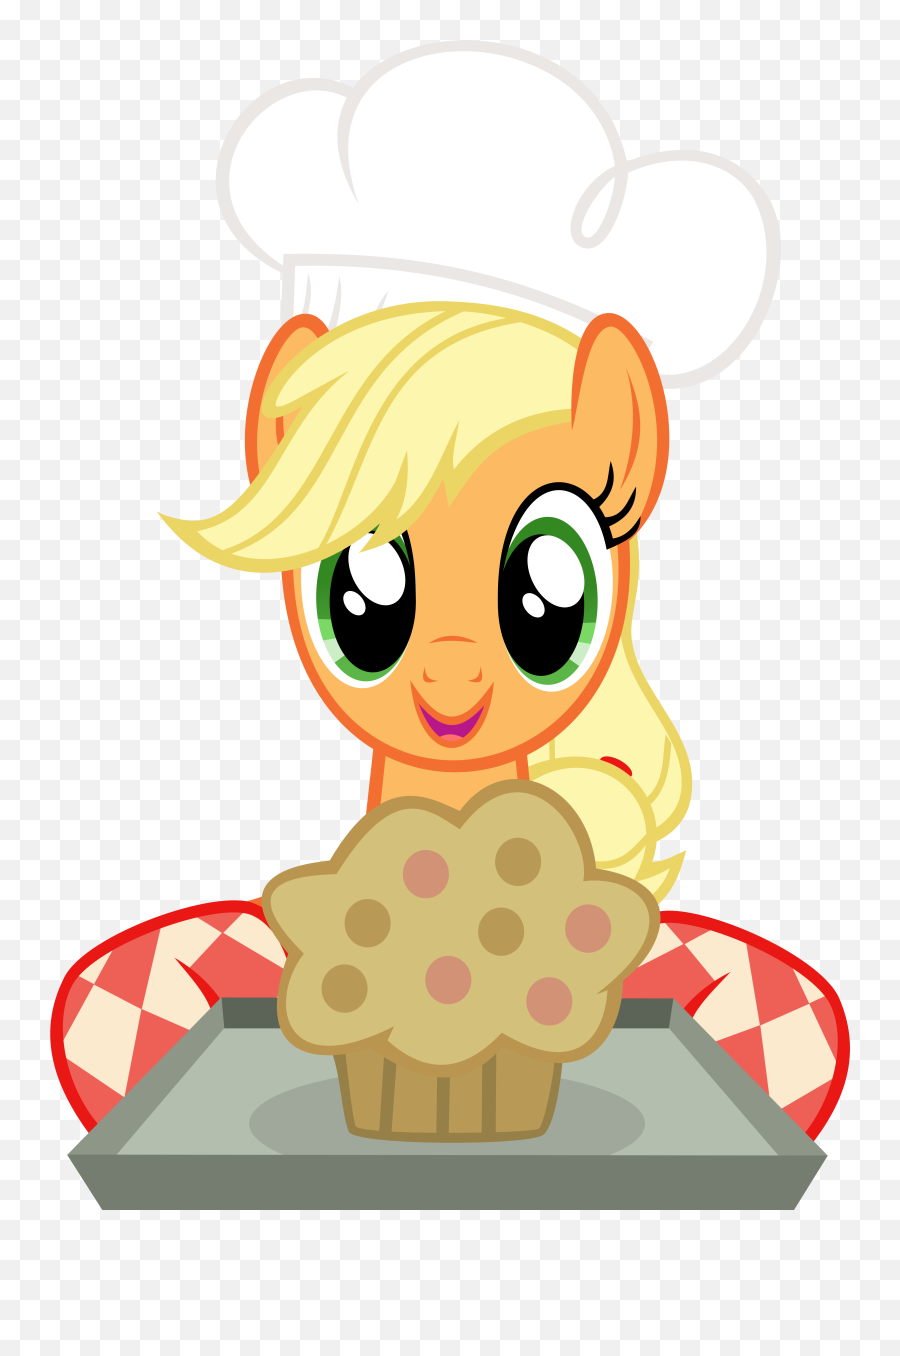 Abydos91 Baking Chefu0027s Hat Hat Muffin Safe Simple - Mlp Cadence And Applejack Emoji,Chefs Hat Clipart